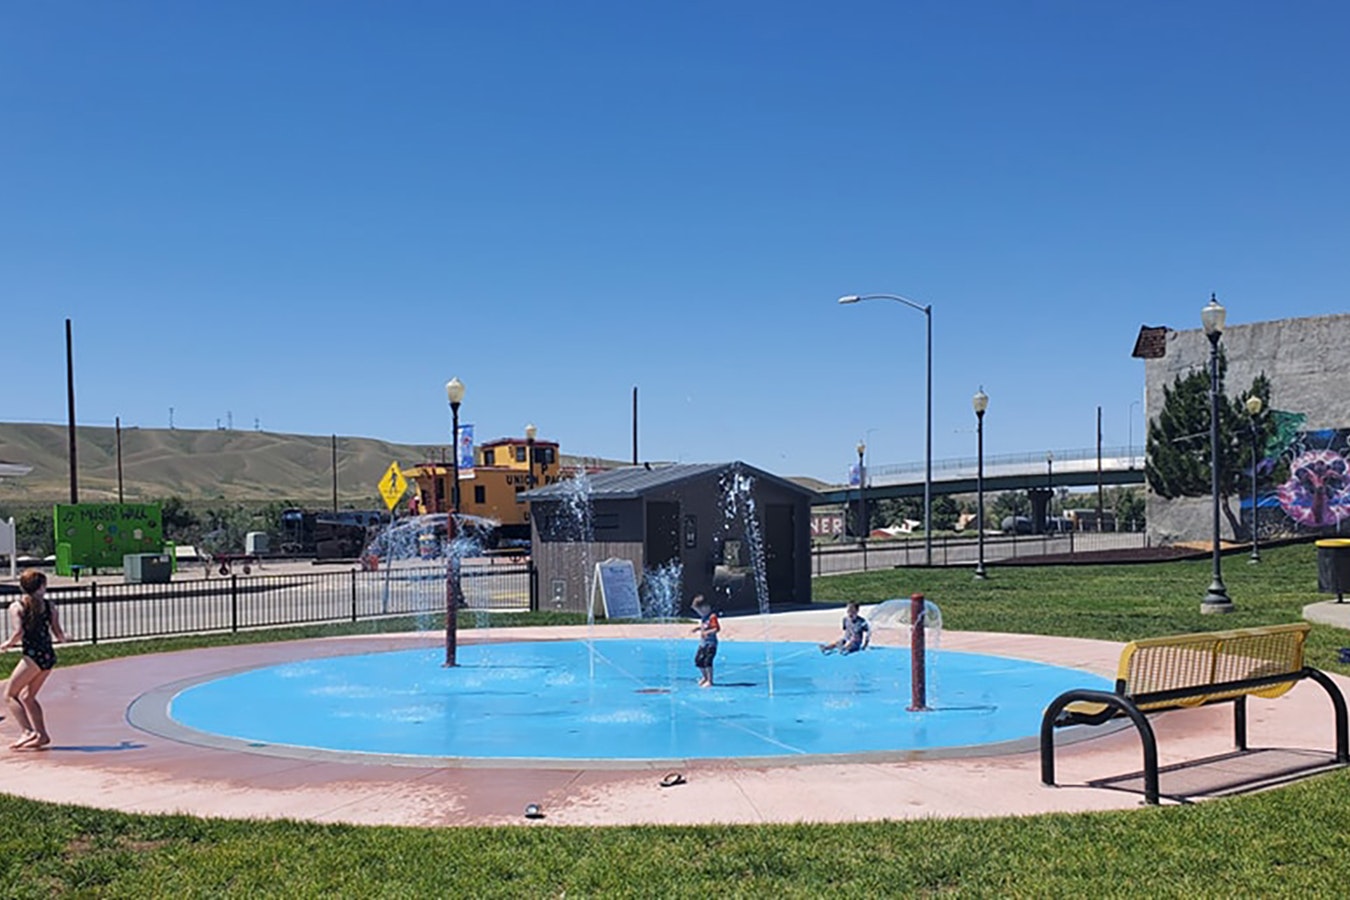 After years of planning and fundraising, a new splash pad opened in Rawlins earlier this month.